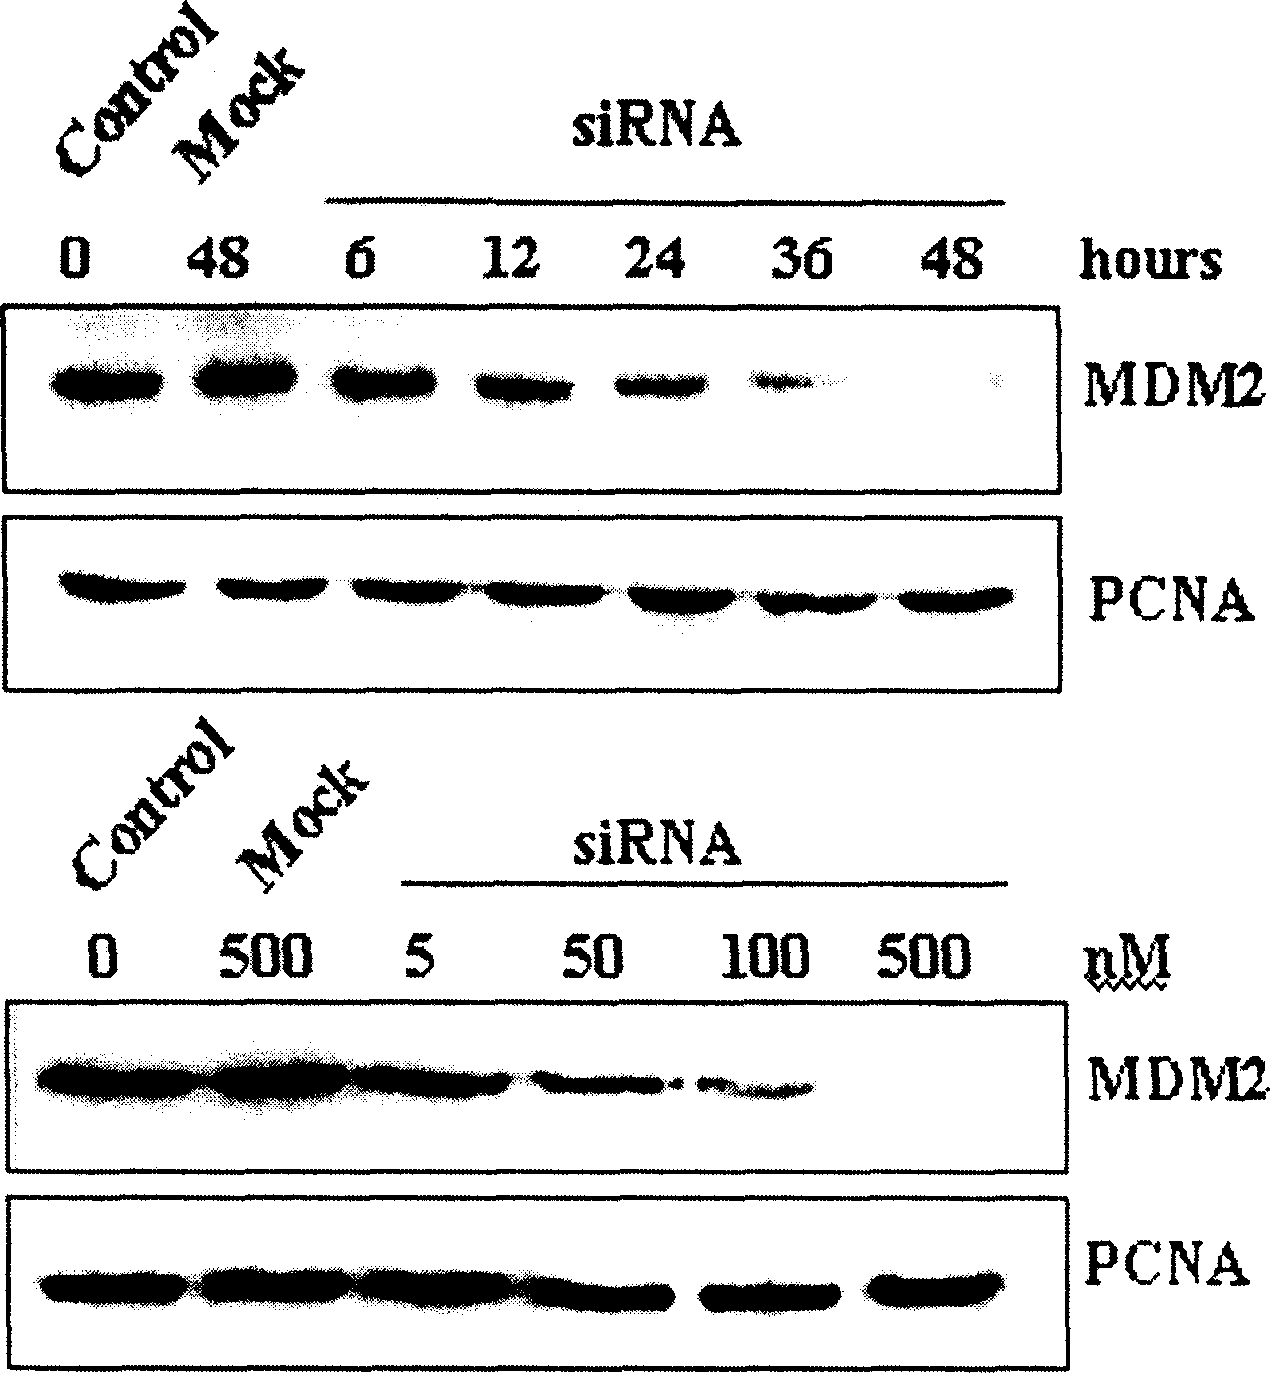 Gene therapeutic drug hdm2-siRNA for breast cancer